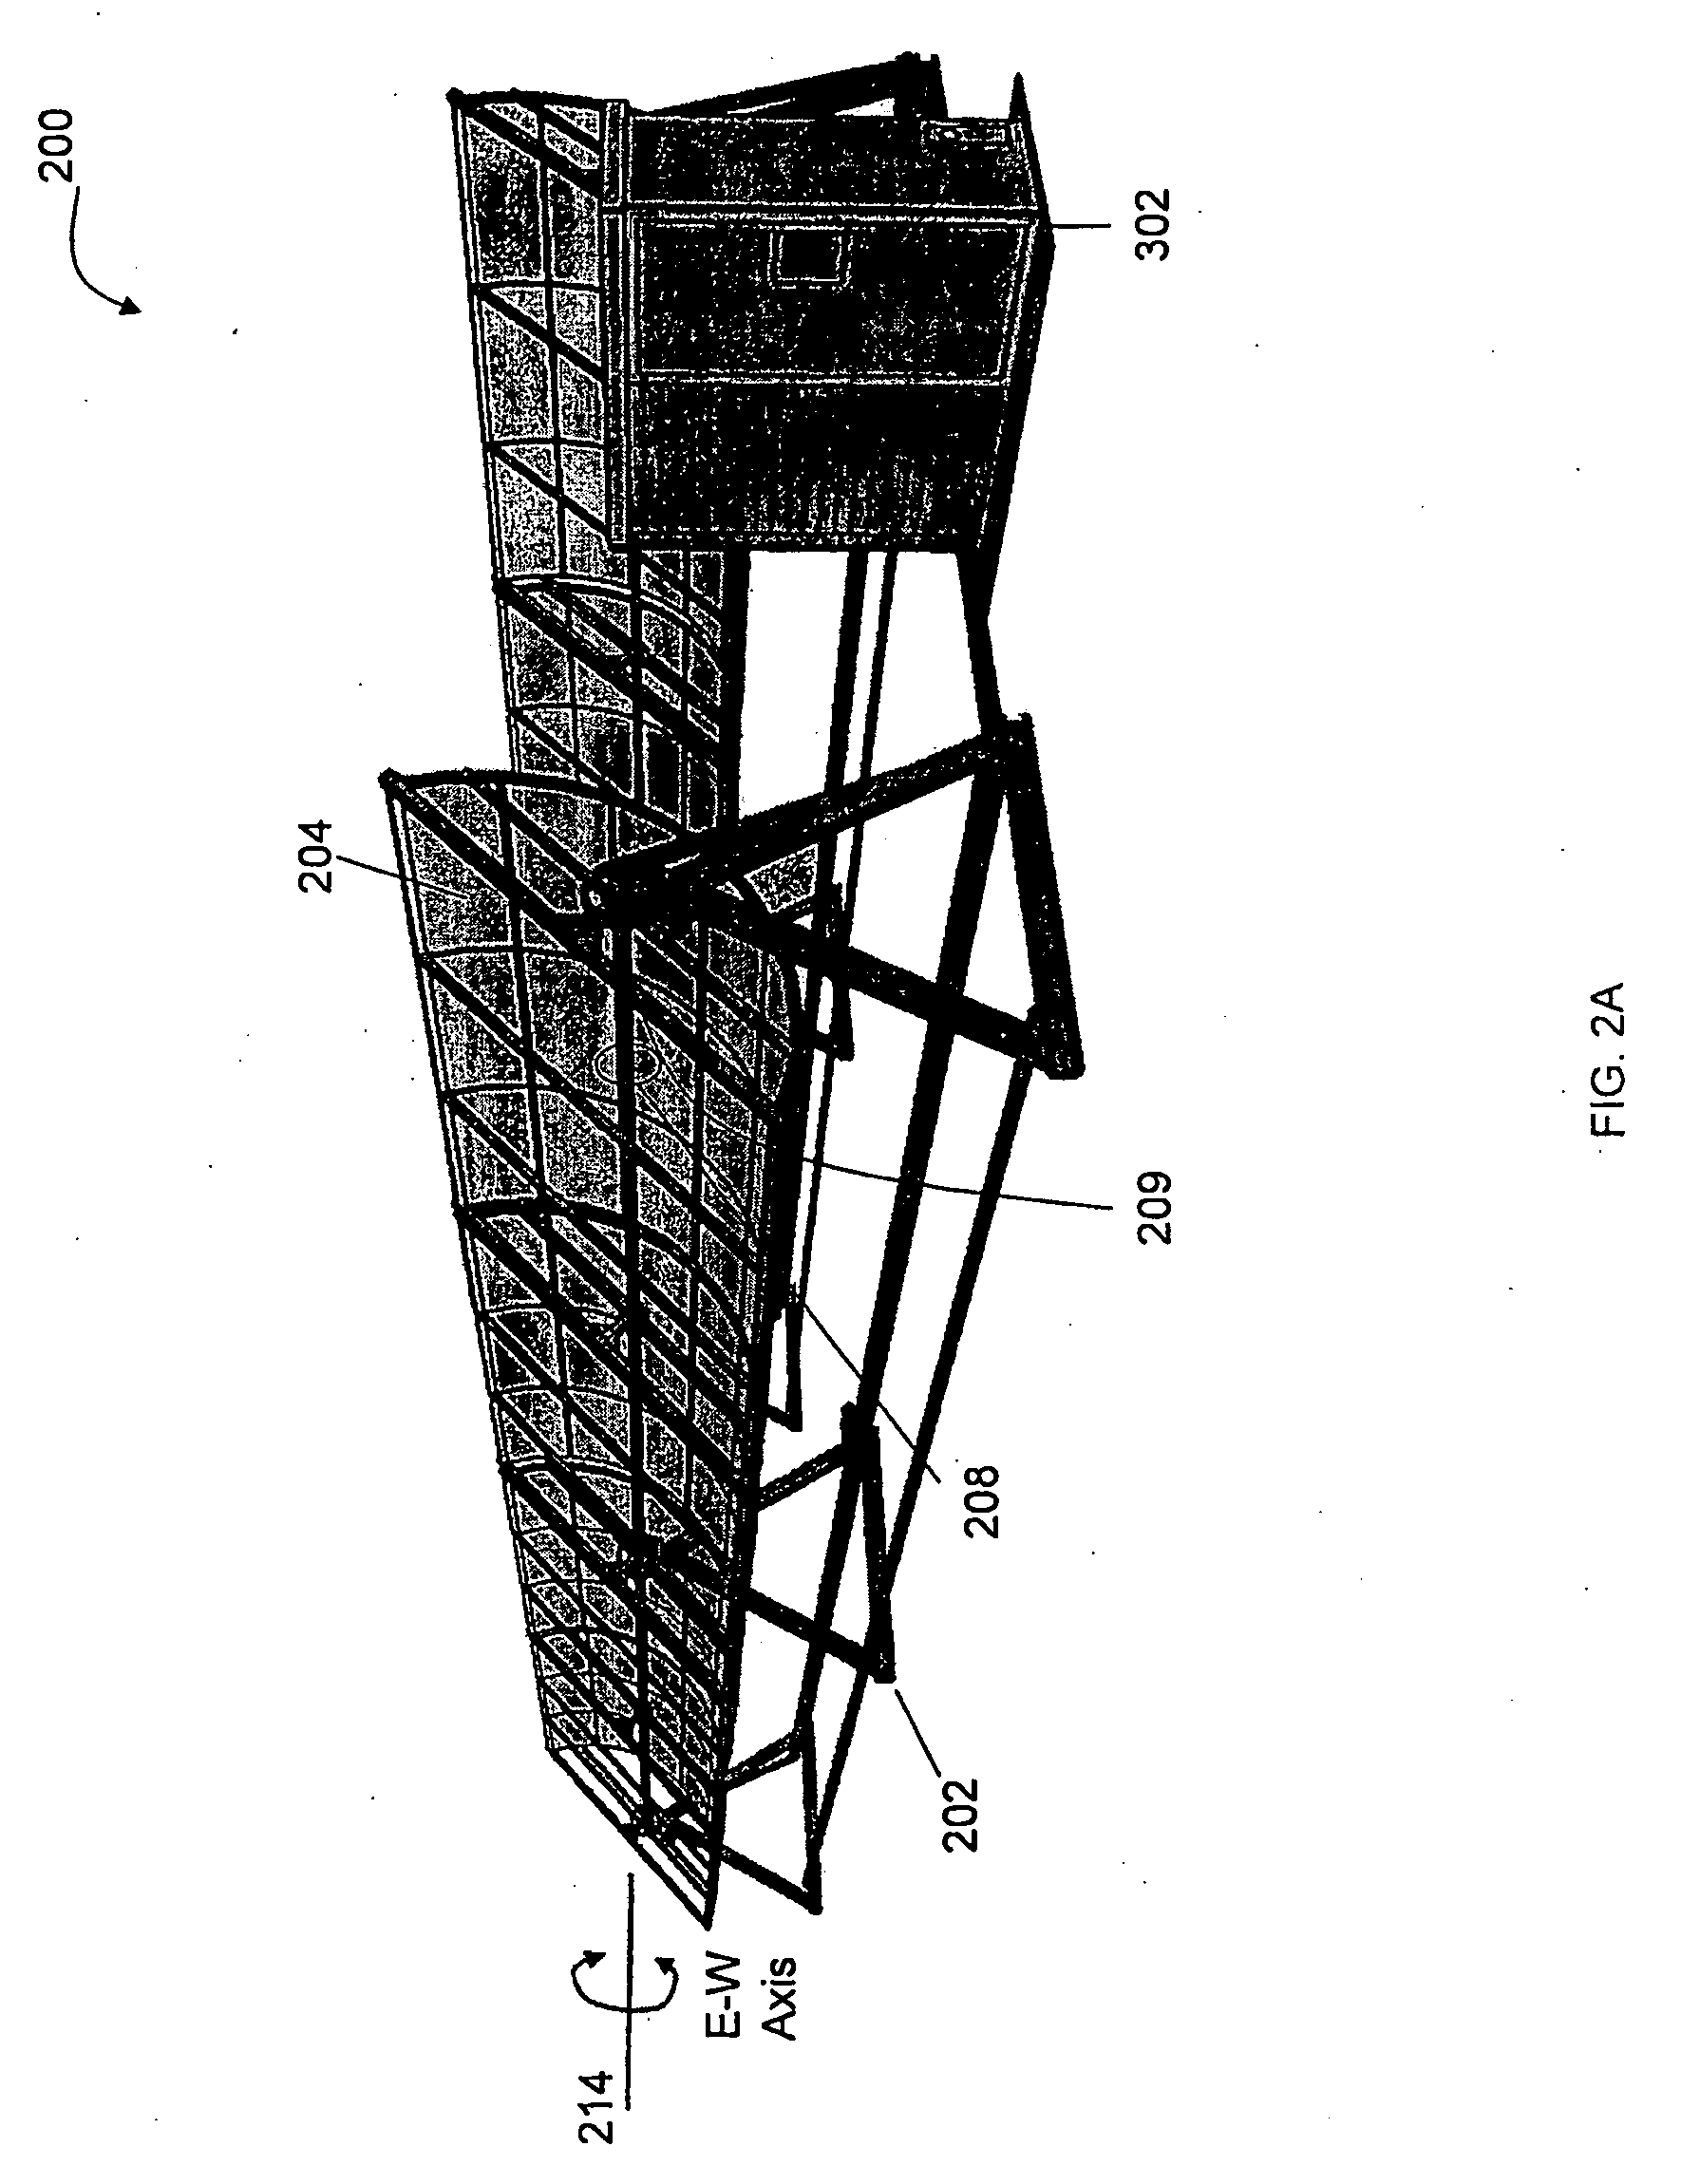 Solar collection and conversion system and methods and apparatus for control thereof